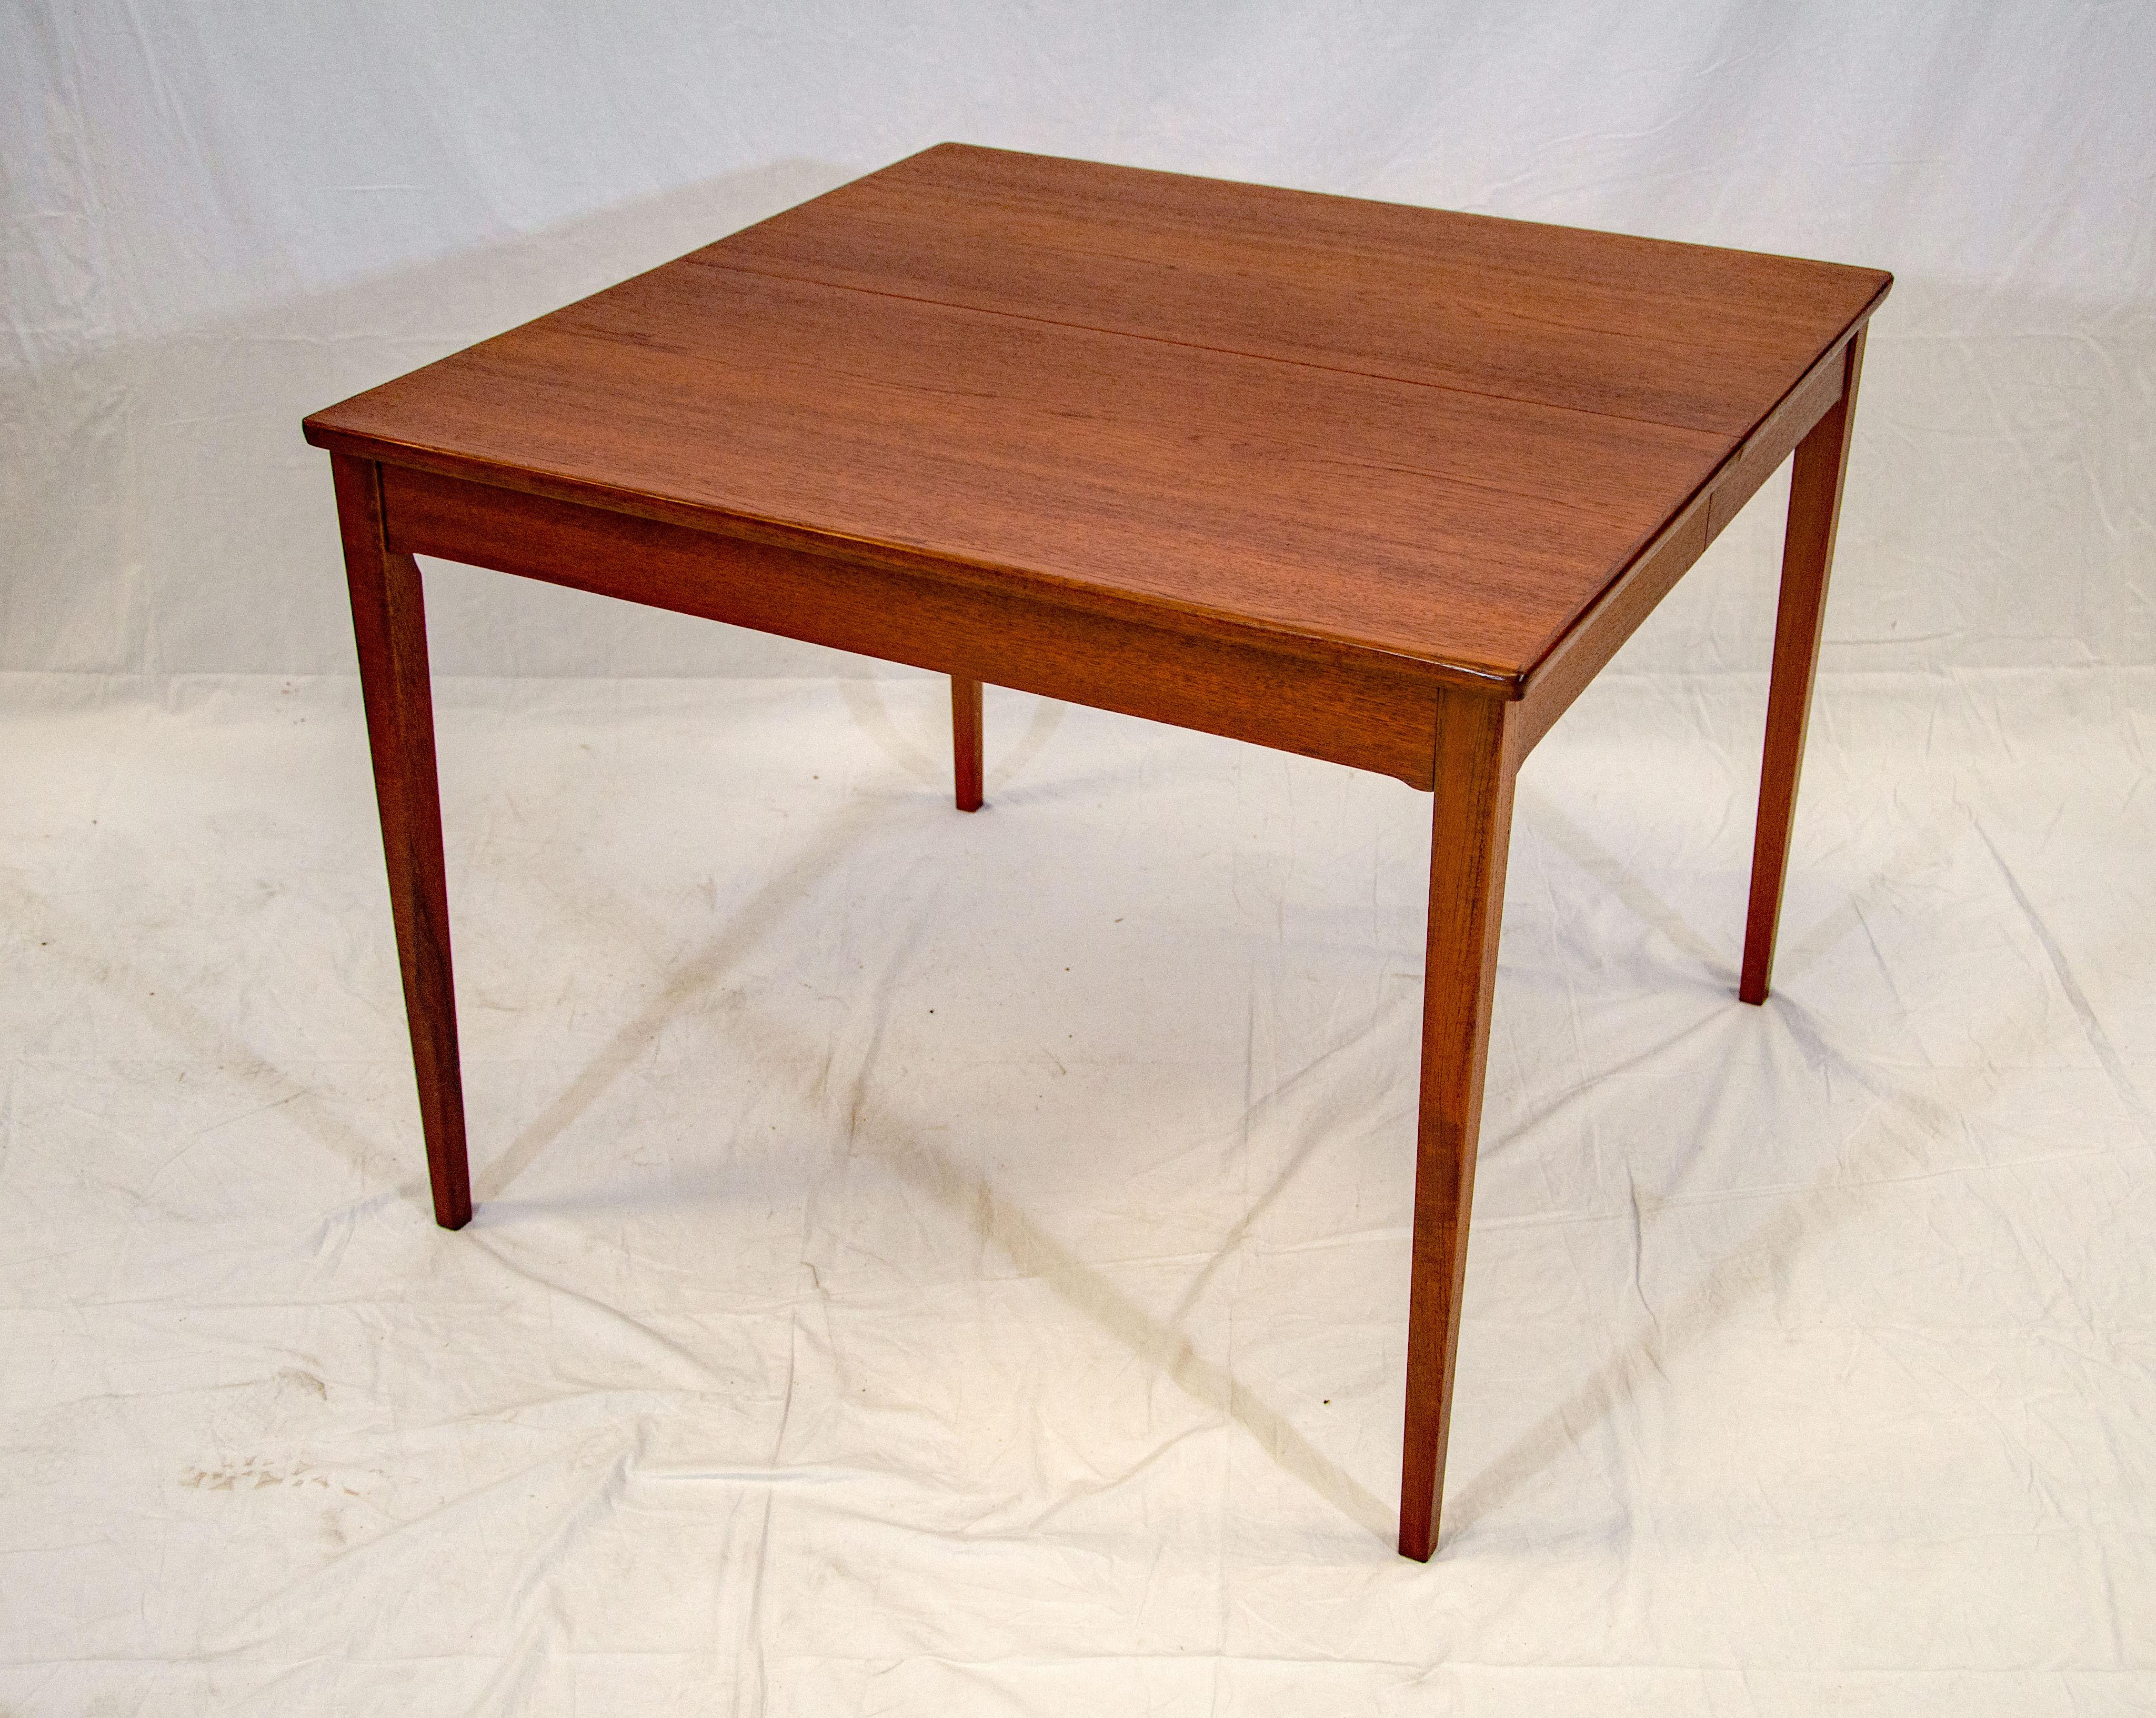 Danish Teak Square Dining Table with Two Leaves, Langkilde Møbler In Good Condition For Sale In Crockett, CA